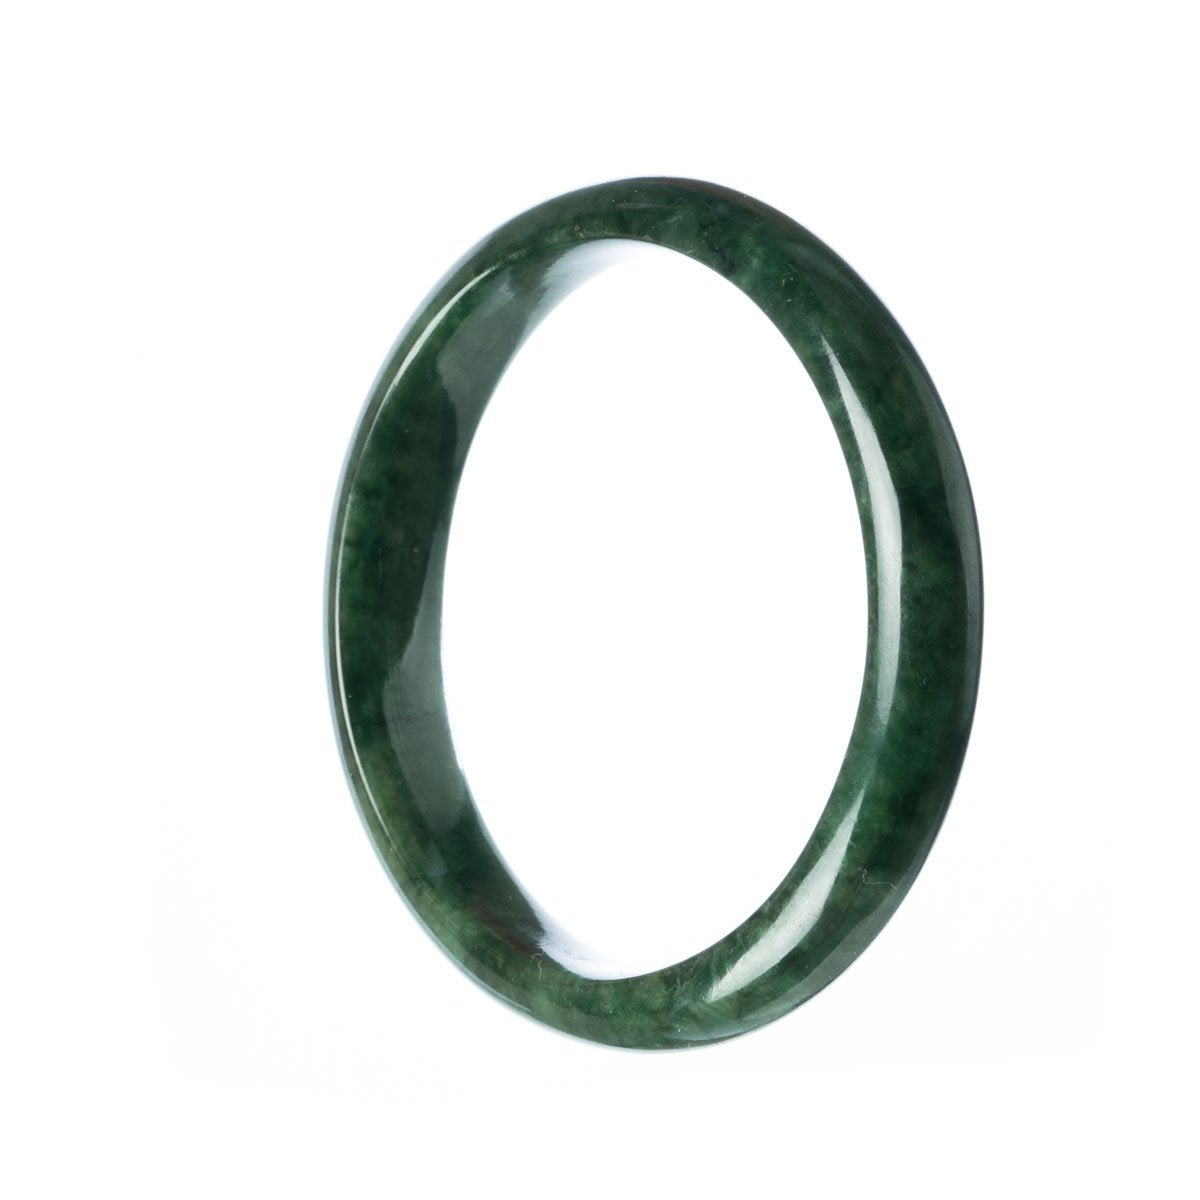 A close-up of a dark green jade bangle with a half-moon shape, exuding natural beauty and elegance.